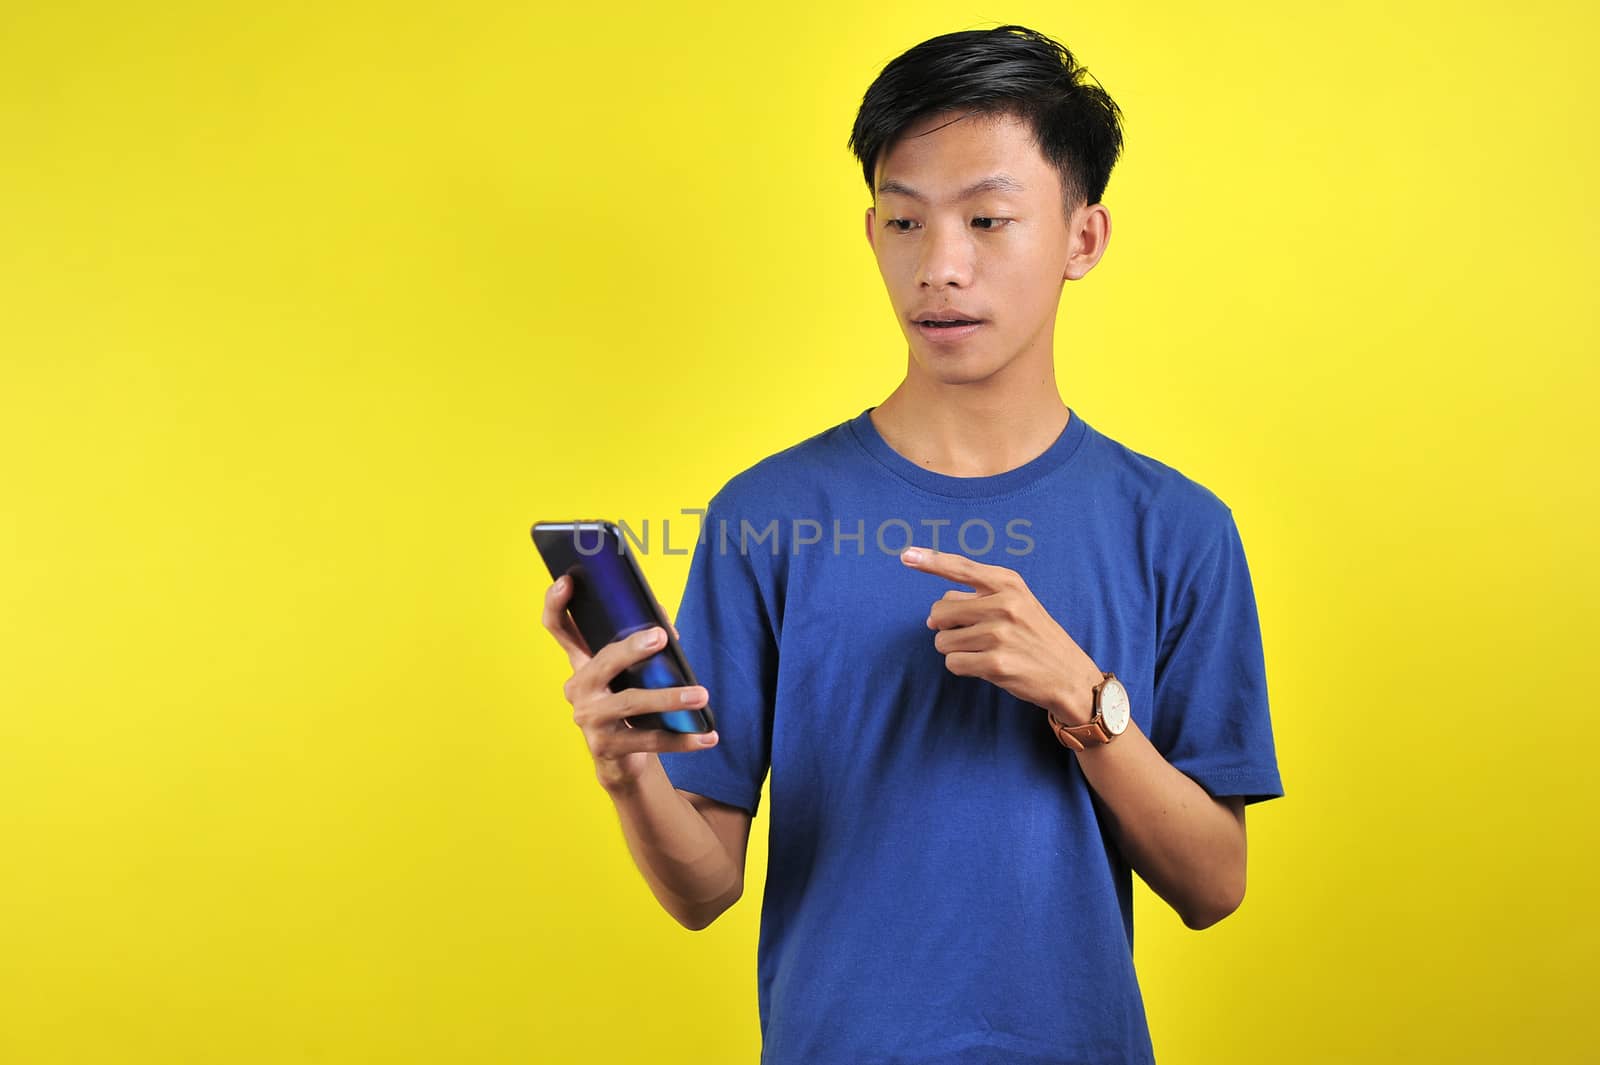 Shocked face of Asian man in white shirt looking at phone screen by heruan1507